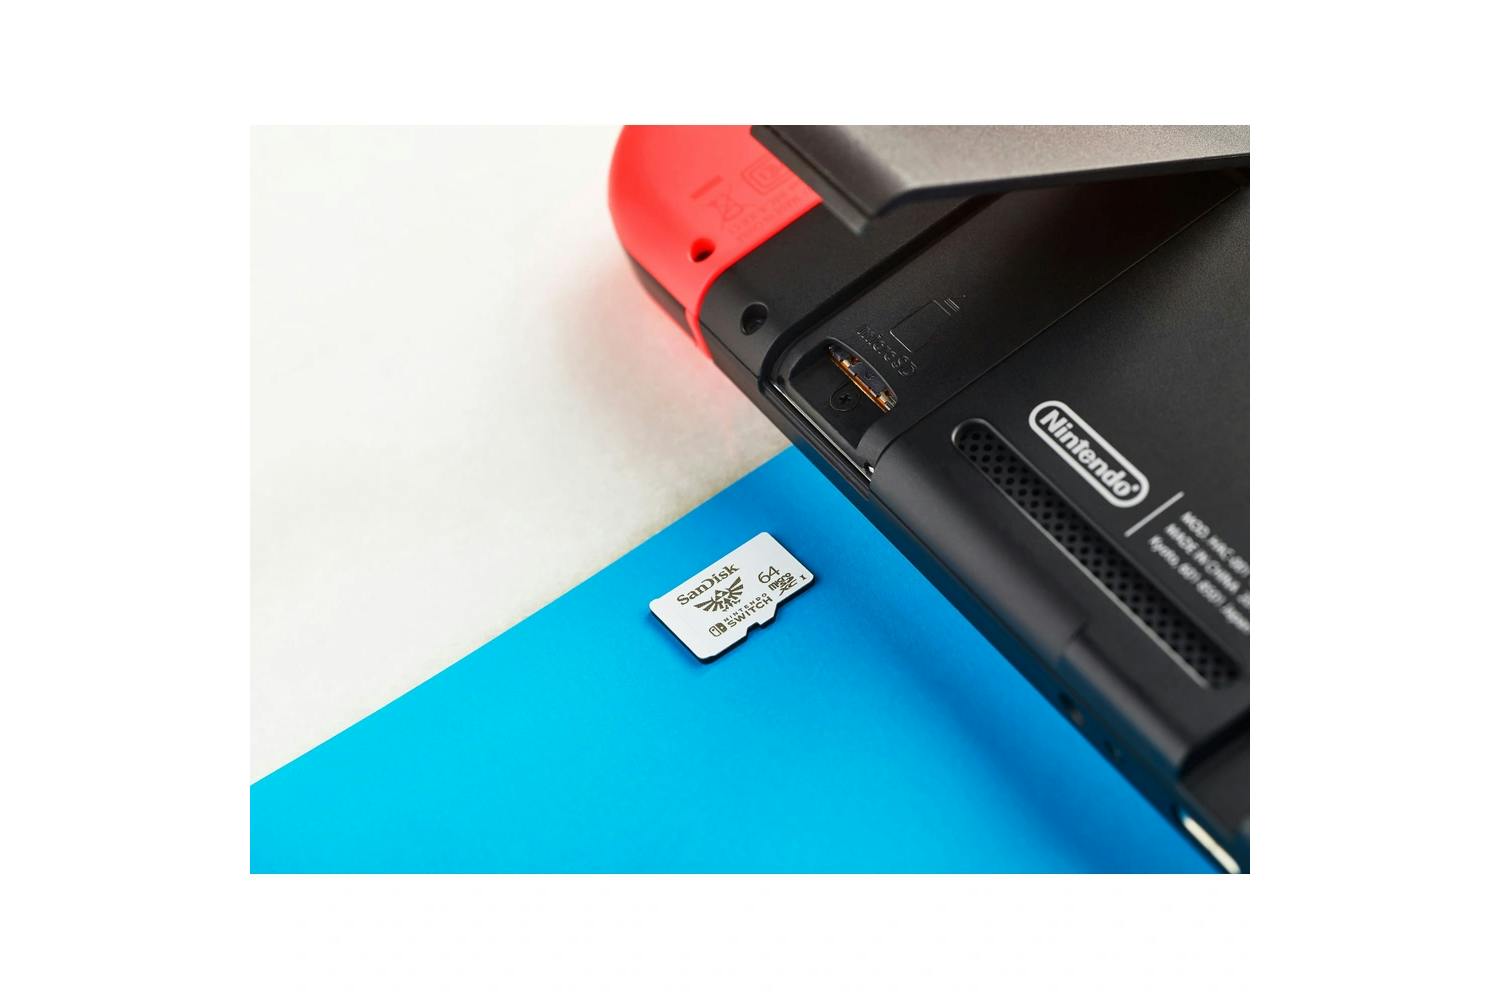 Ultra microSD Card with Adapter 64GB for Nintendo Switch